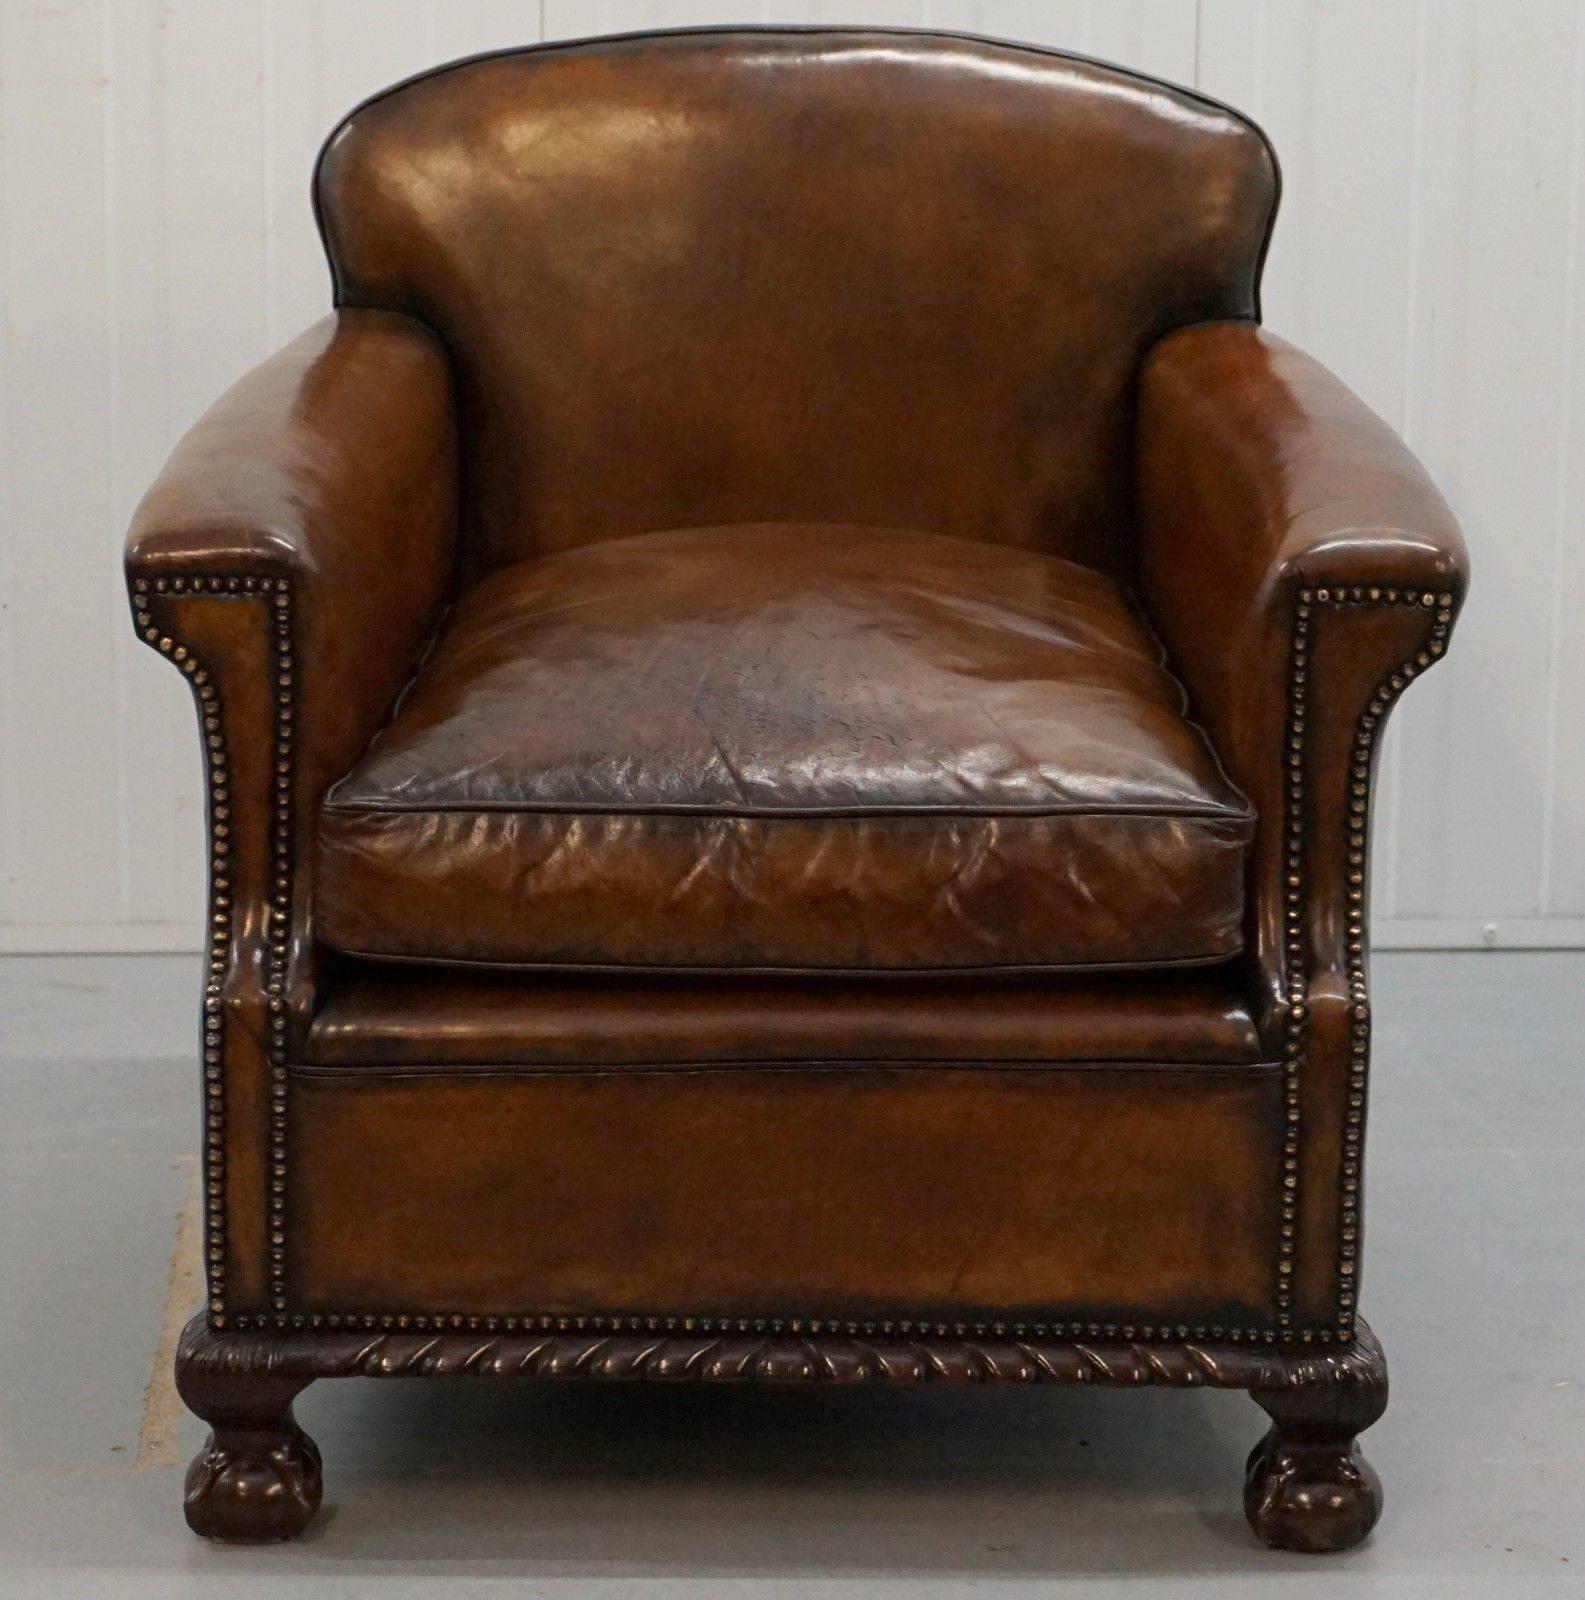 We are delighted to offer for sale this stunning pair of original Victorian fully restored whisky brown leather club armchairs with coil sprung bases feather filled cushions and claw and ball feet

A very good looking well-made pair in fully